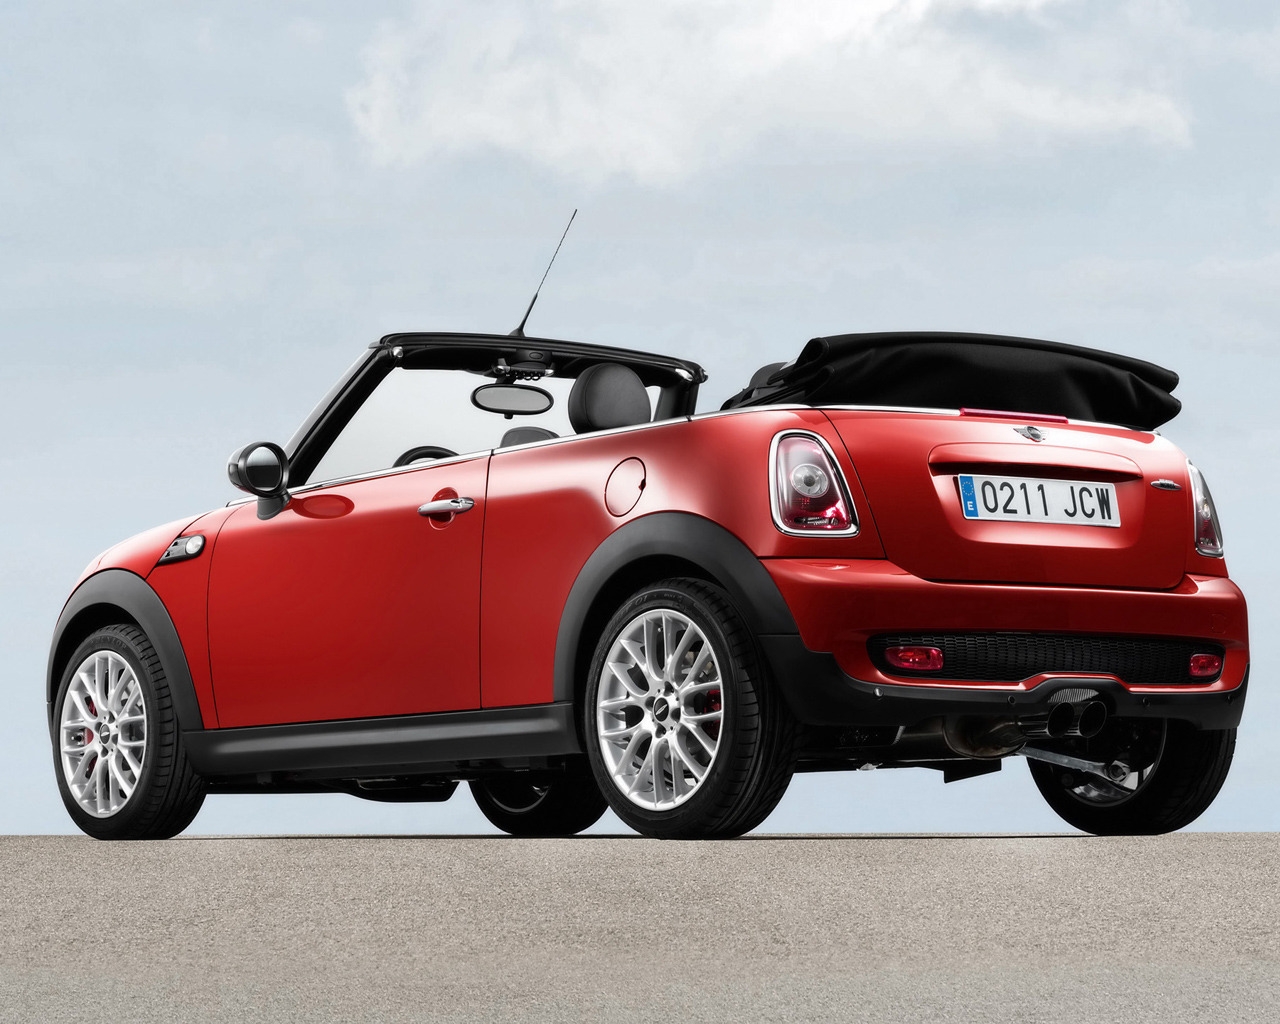 Mini Cooper Convertible Rear And Side for 1280 x 1024 resolution